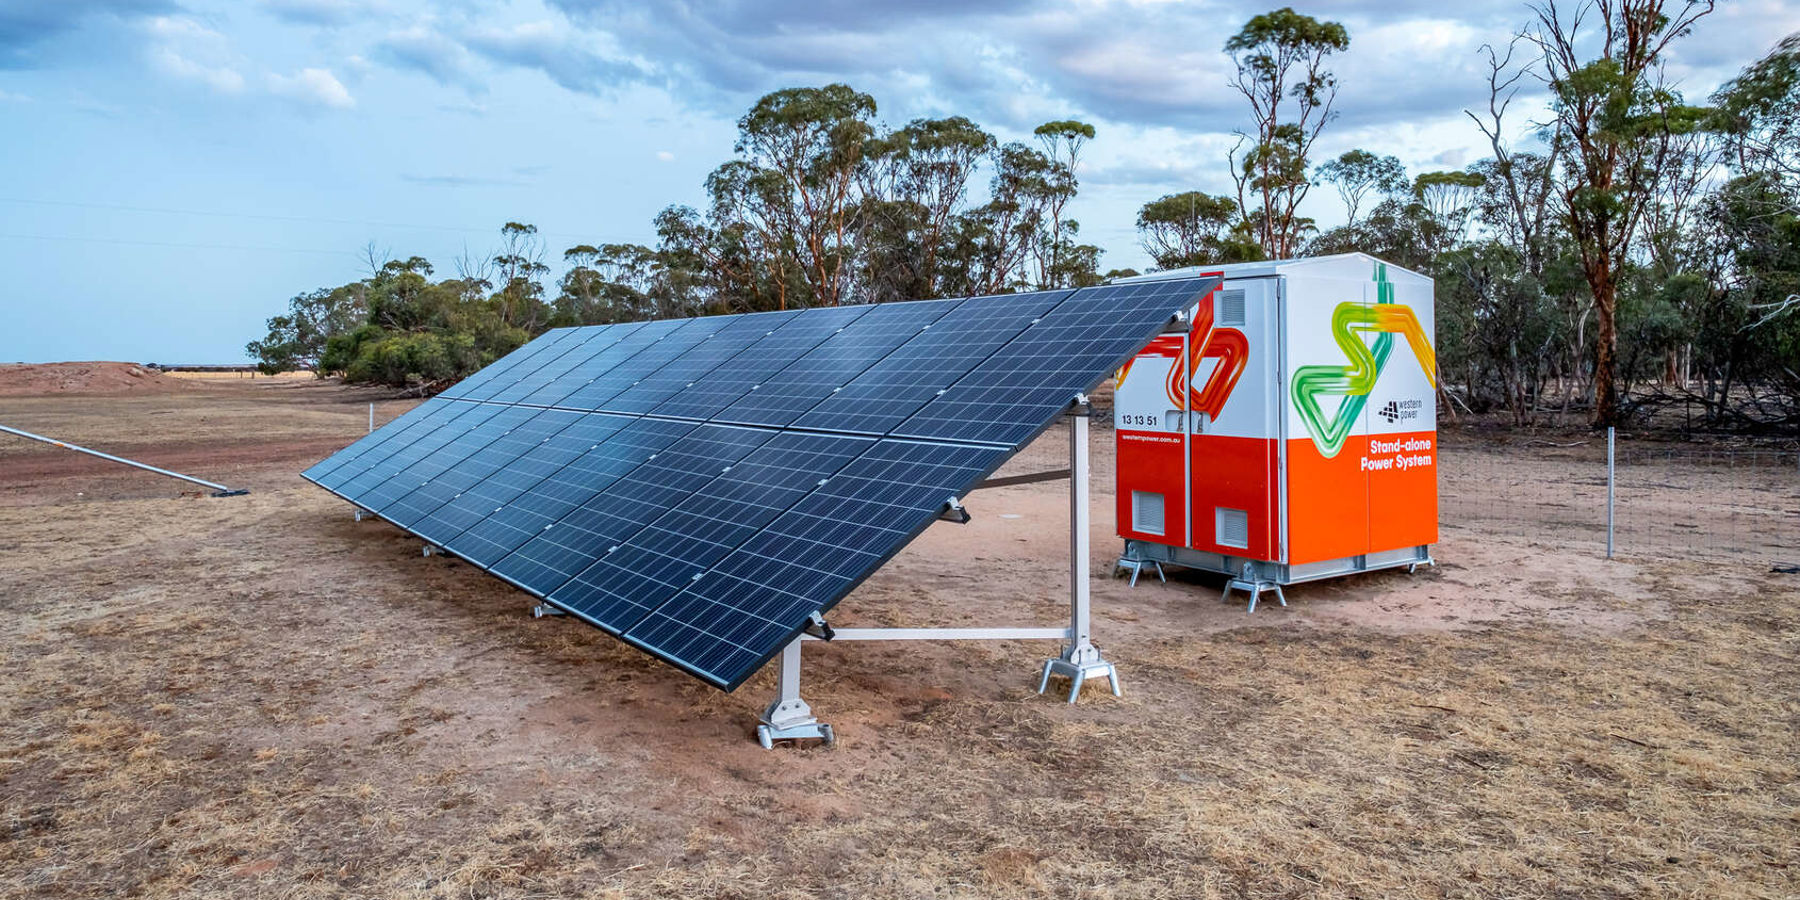 SPS unit and solar panels in a field in Bondallin